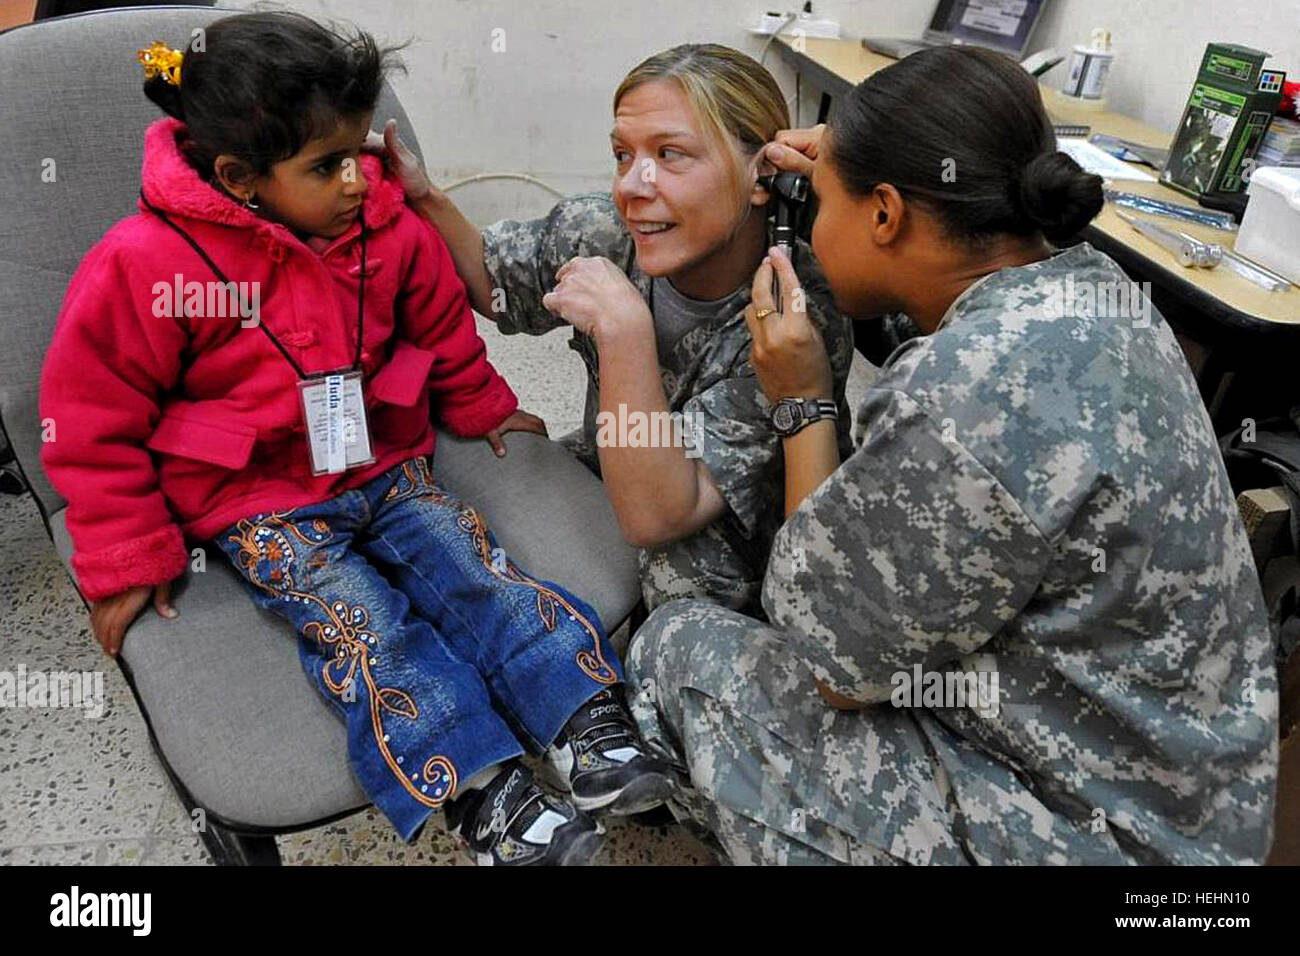 Capt. Lori August and Capt. Ramona Toussant show a hearing-impaired Iraqi girl from Rumaythuh, Iraq, how they administer a hearing examination, Dec. 11, 2008. The Iraqi girl is visiting Combat Operations Base Adder in Tallil, Iraq, to be tested for a hearing aid. August and Toussant are assigned to the 1st Cavalry Division's Company C, 27th Brigade Support Battalion, 4th Brigade Combat Team.  U.S. Army photo by Staff Sgt. Brendan Stephens Flickr - The U.S. Army - www.Army.mil (145) Stock Photo